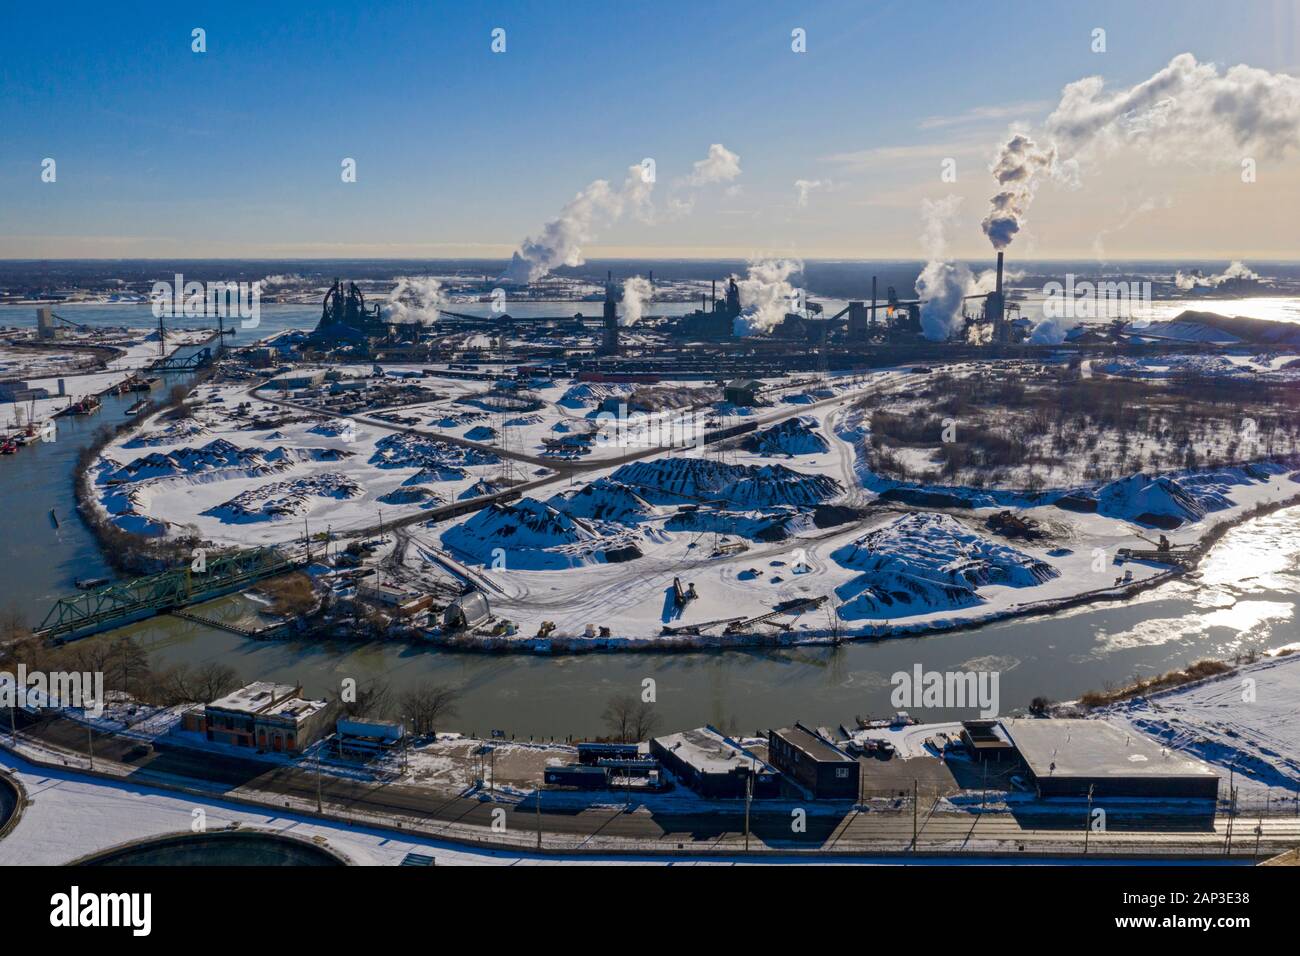 River Rouge, Michigan - The United States Steel plant on Zug Island, part of the company's Great Lakes Works. US Steel plans to close most of Great La Stock Photo